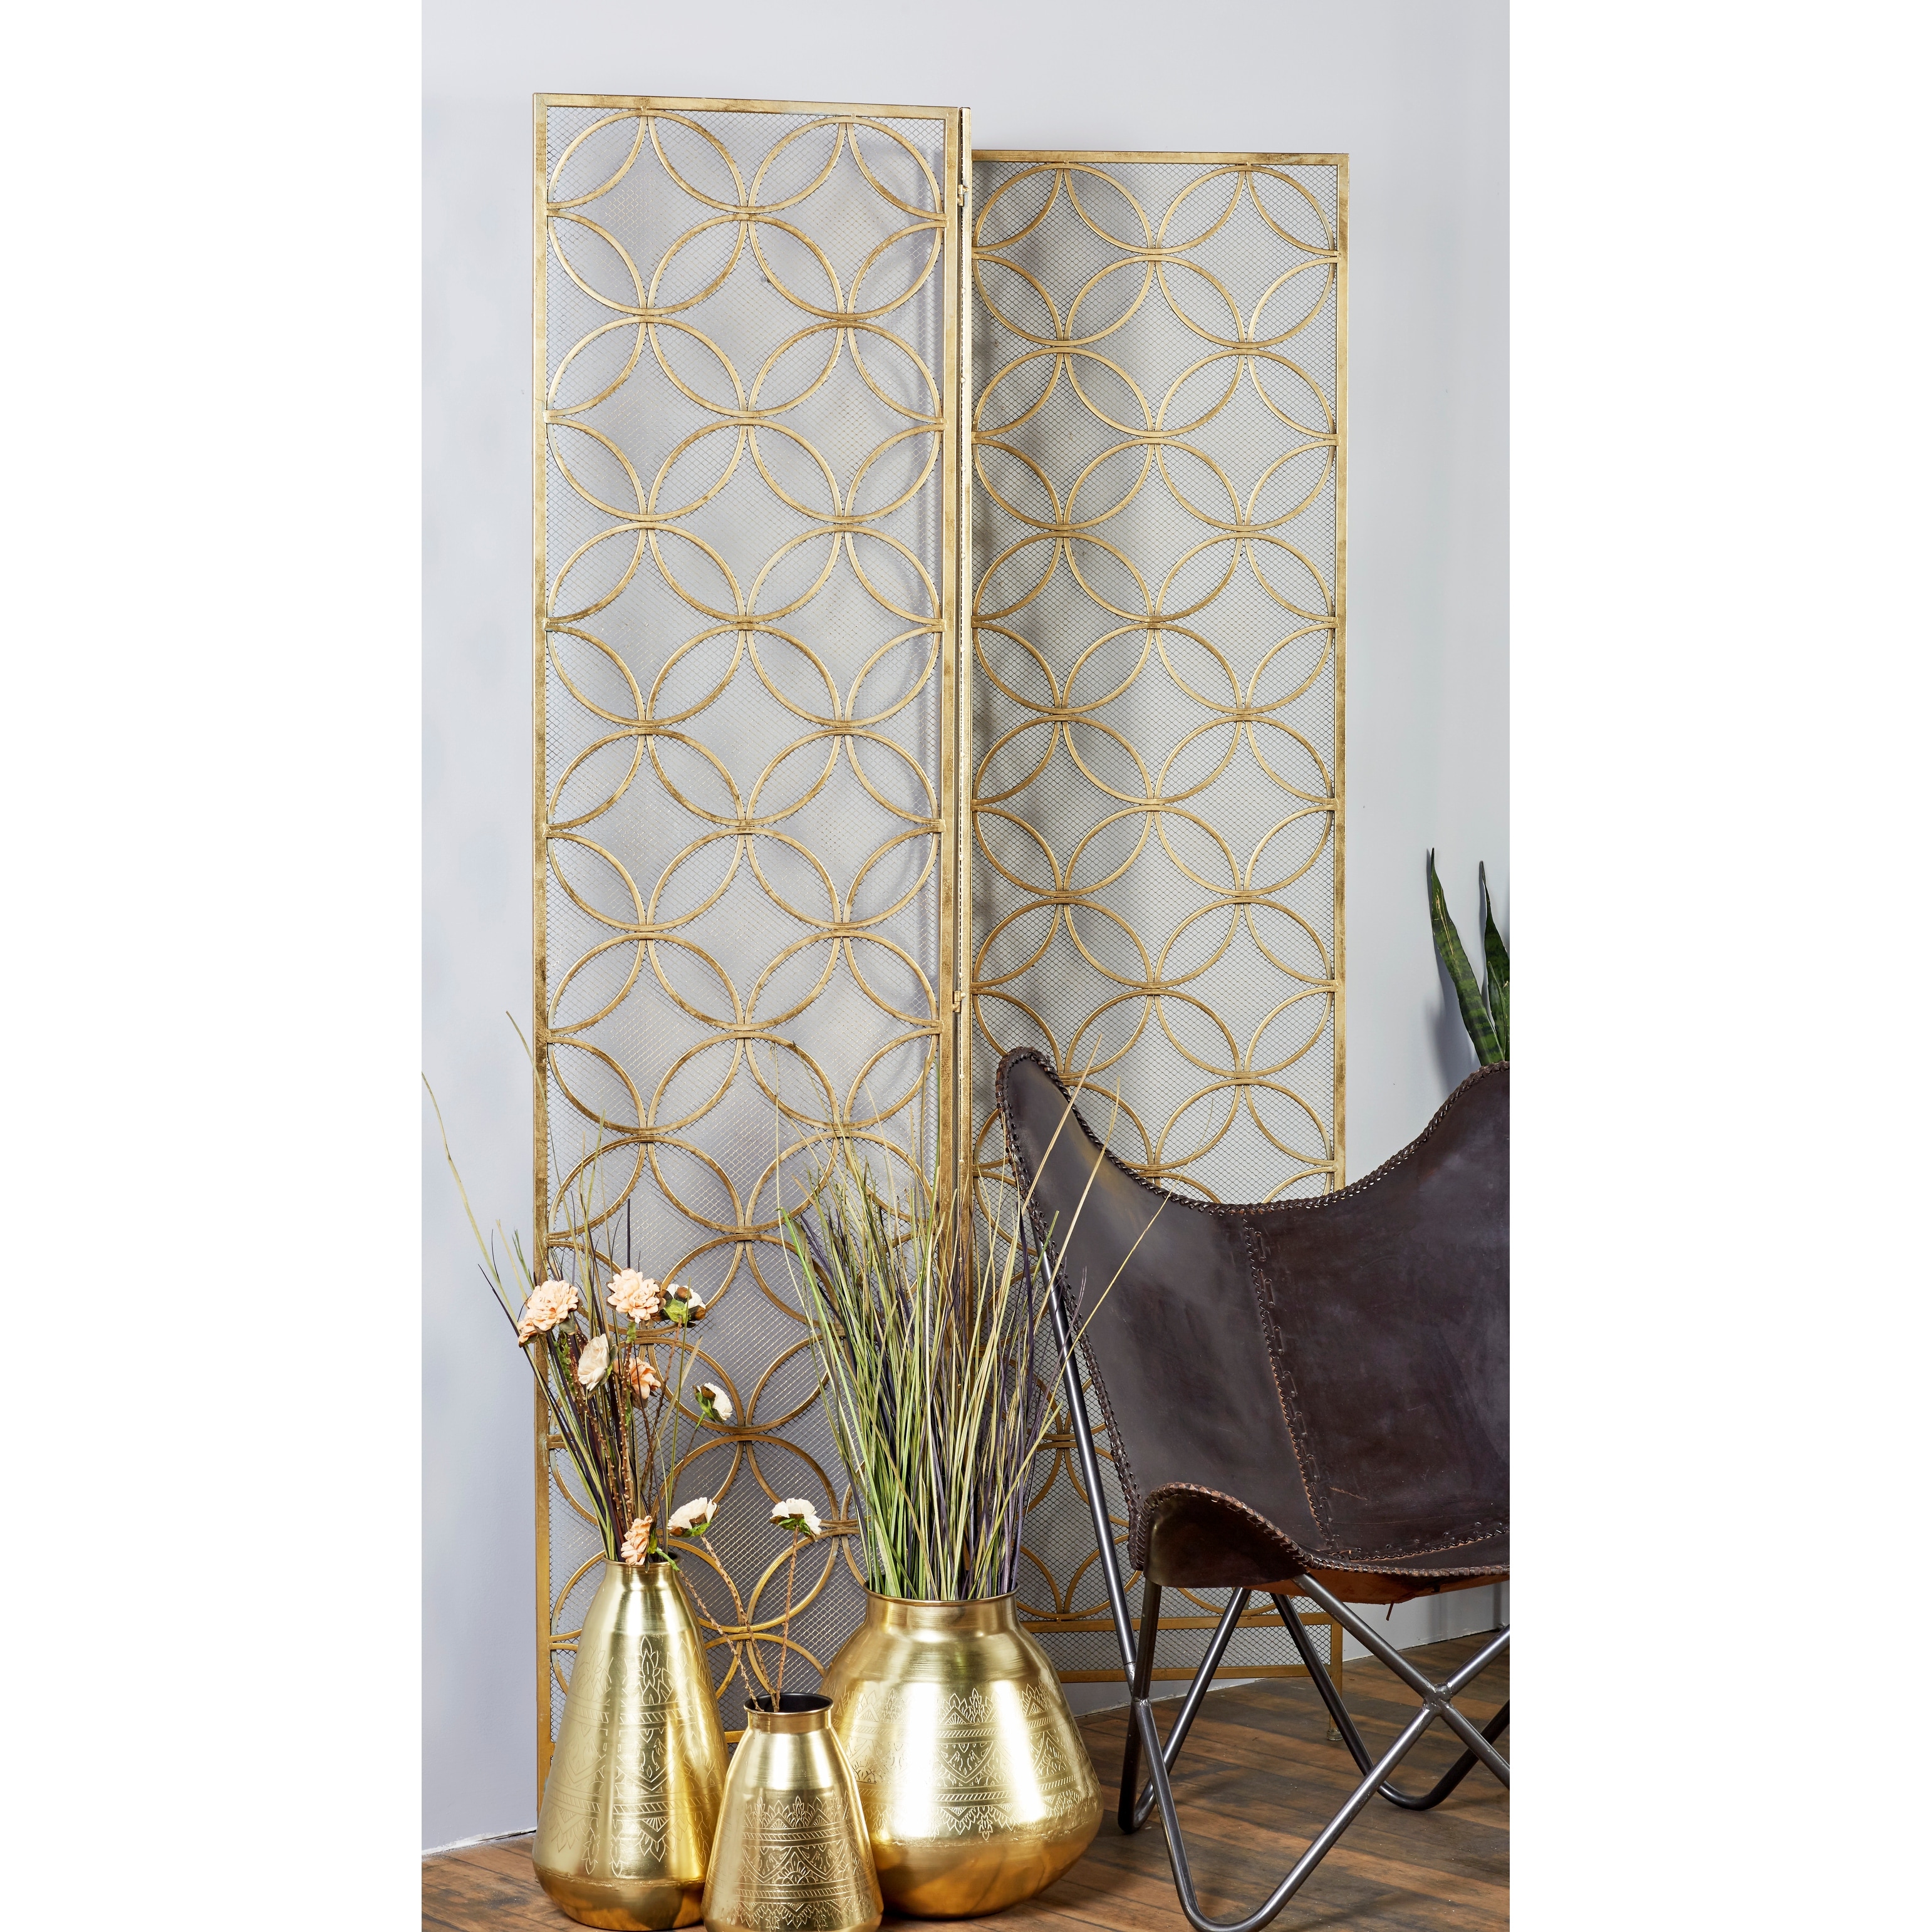 Metal Wire 57-inch x 79-Inch 3-Panel Screen